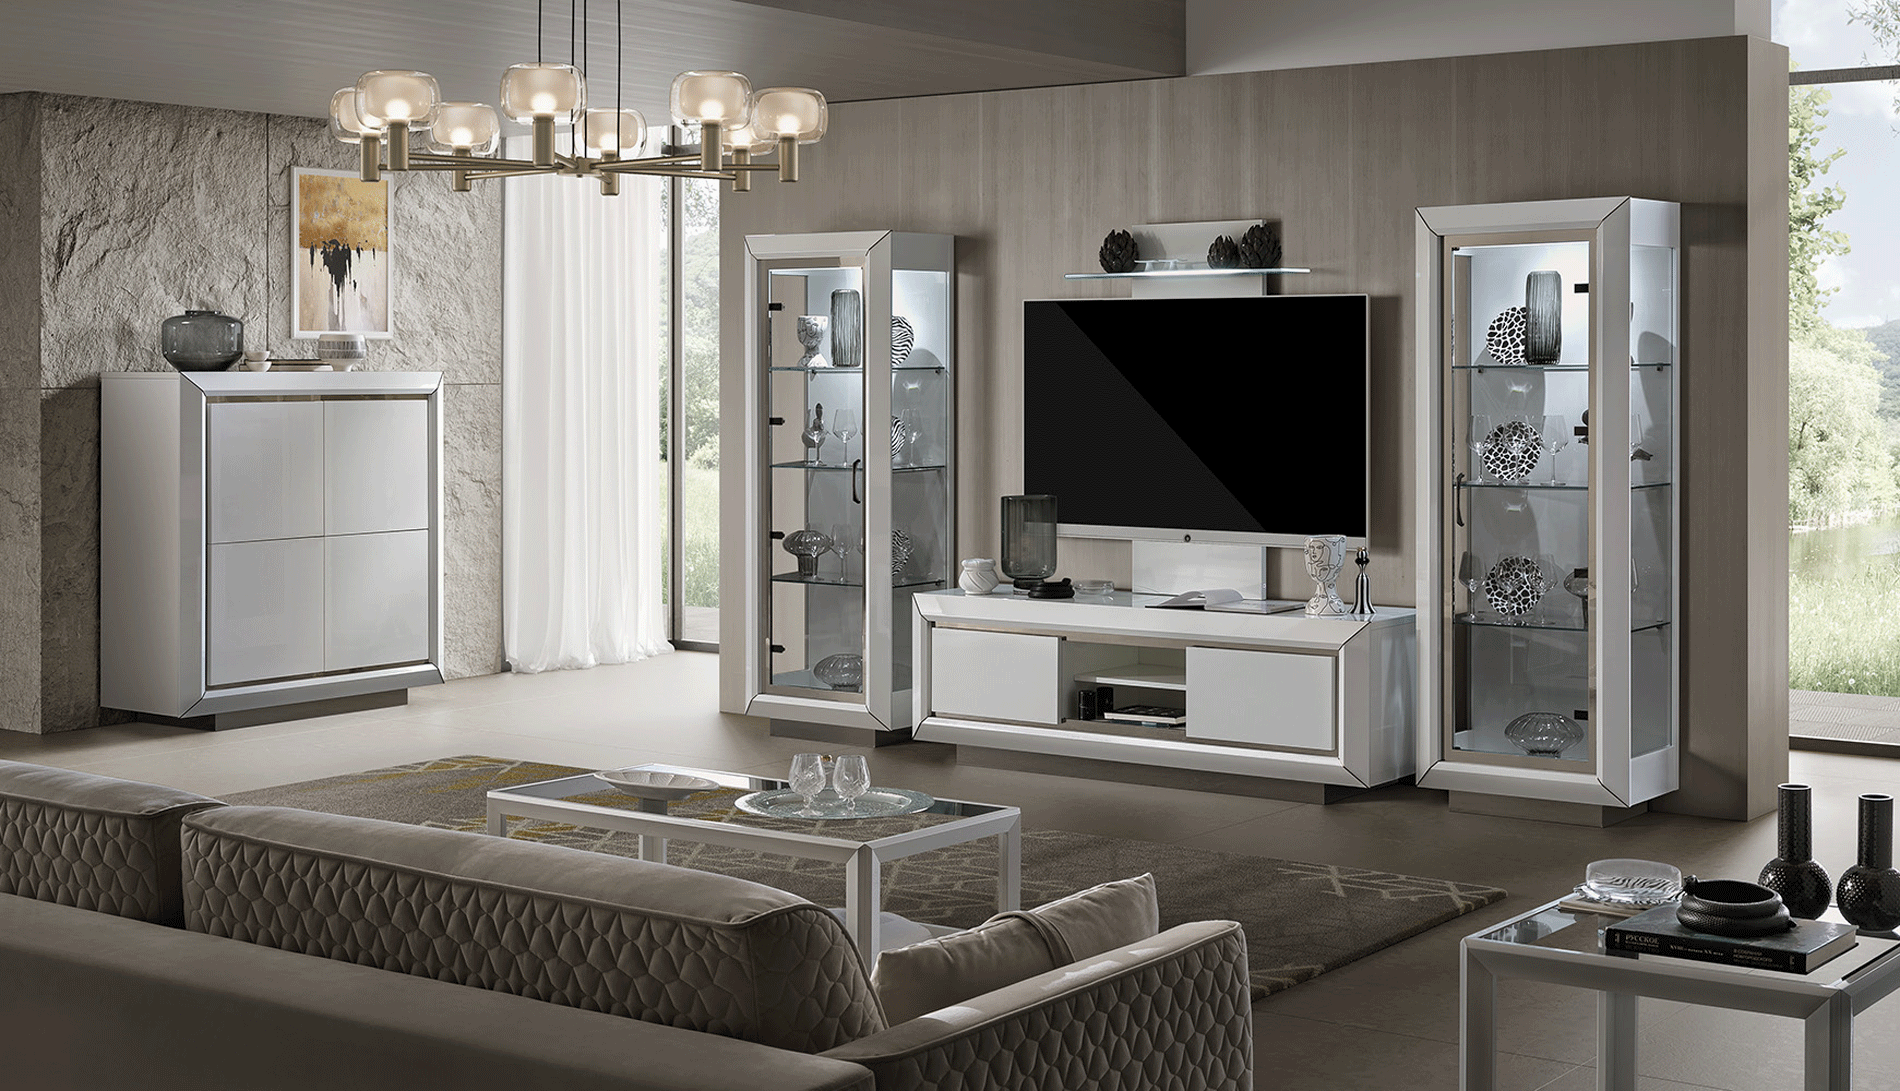 Brands Arredoclassic Living Room, Italy Elite WHITE Entertainment center Additional items